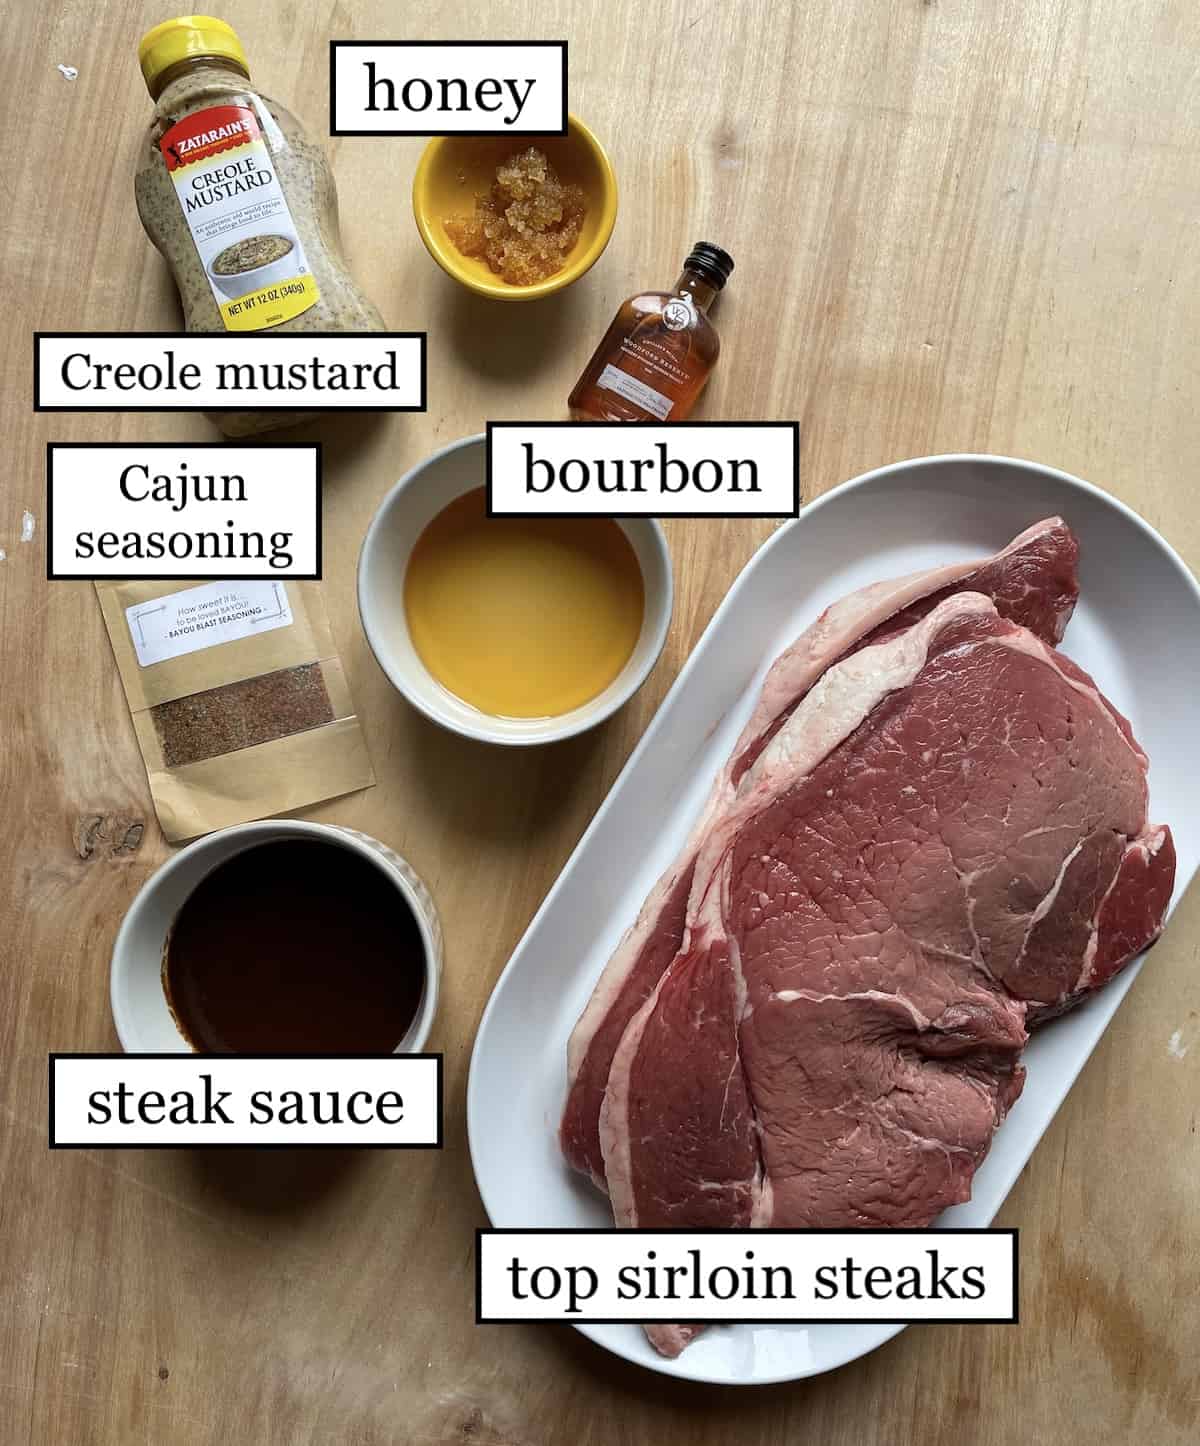 The ingredients in Applebee's Bourbon Street Steak laid out and labeled.